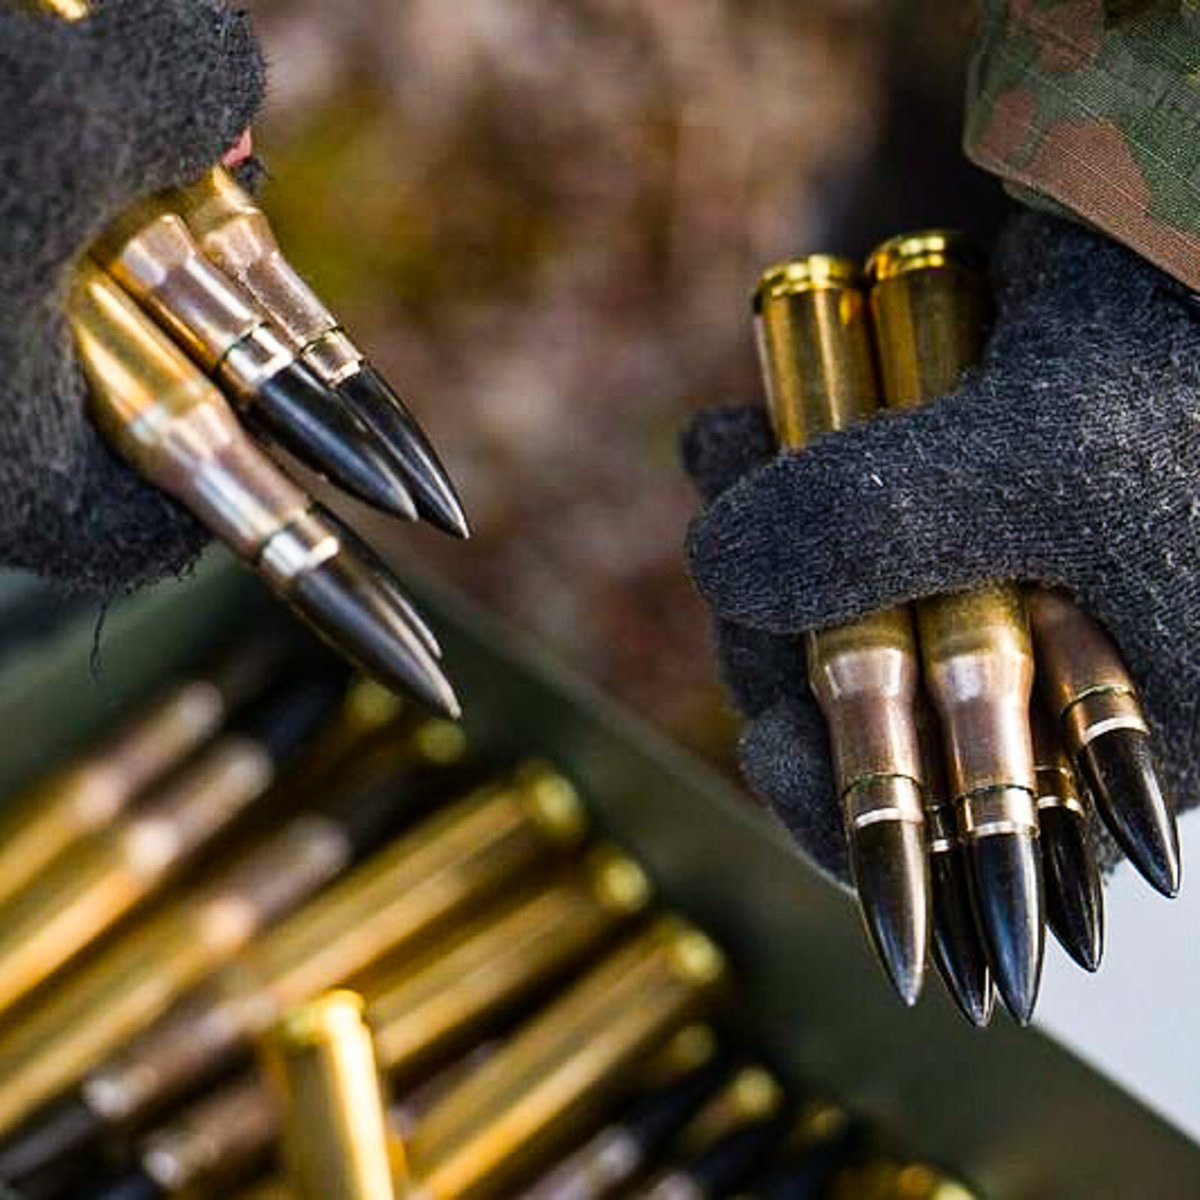 In the latest article on #NATOReview, authors from NATO and the US Army War College describe how there is currently an unprecedented opportunity to broaden the use of NATO ammunition standards 

🔗 nato.int/docu/review/ar…